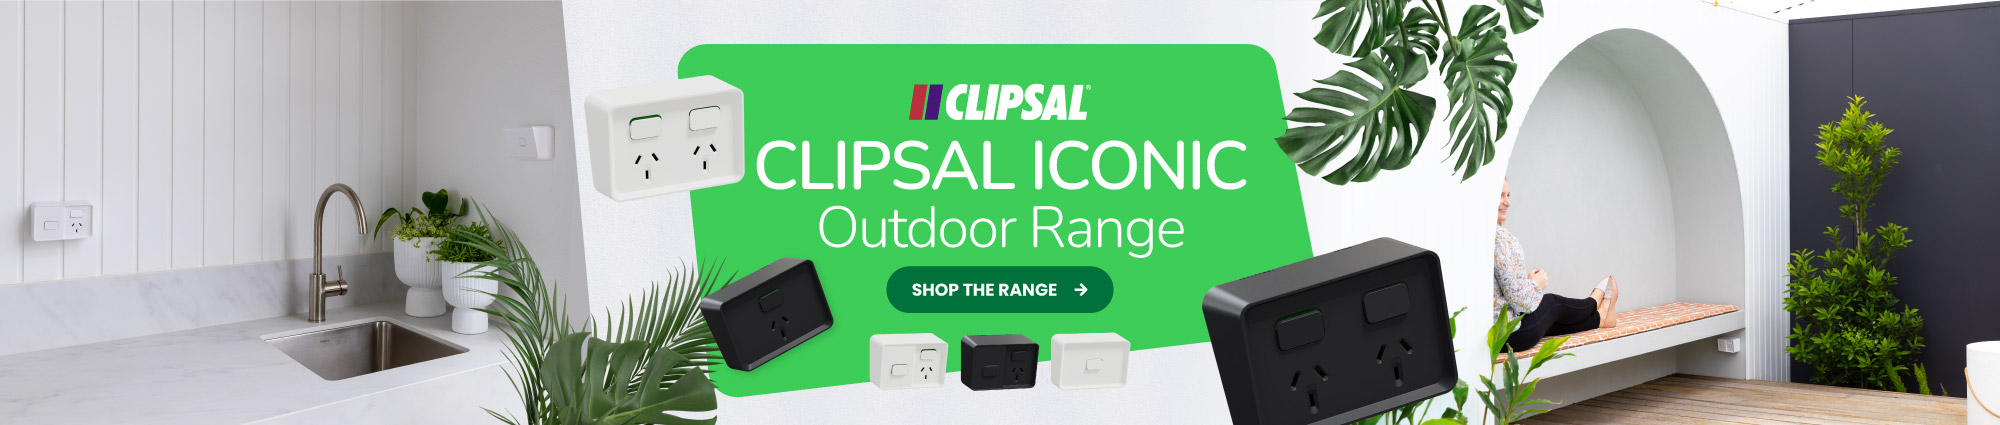 Home Page Banner - Iconic Outdoor